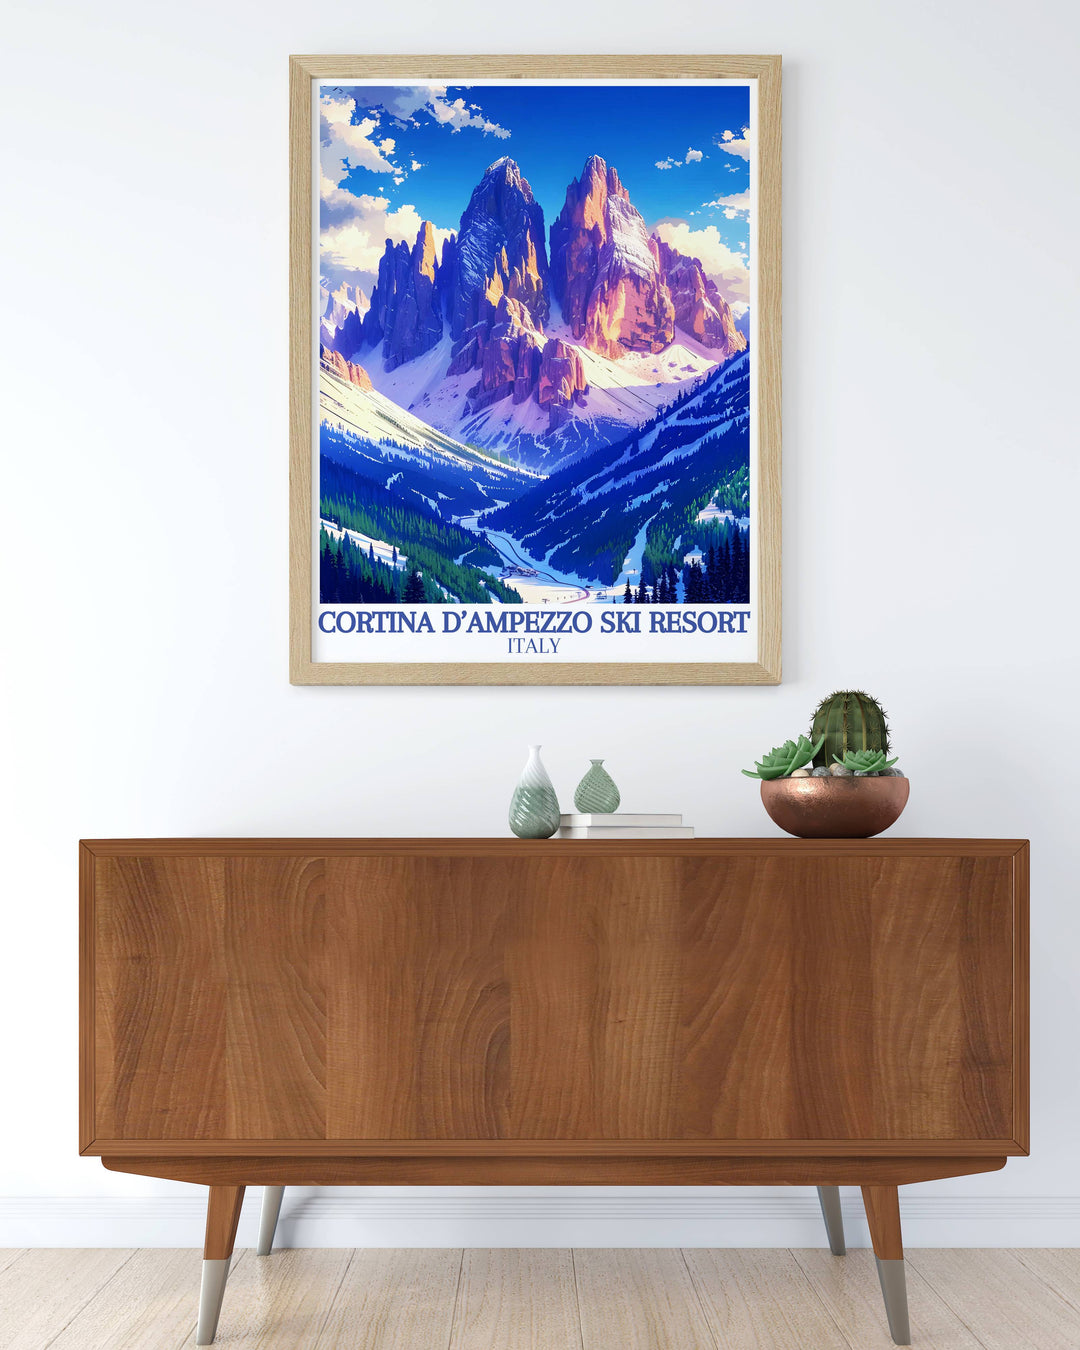 Autumn colors at Cinque Torri, showcasing the vibrant foliage and rocky landscapes in a beautifully crafted travel poster